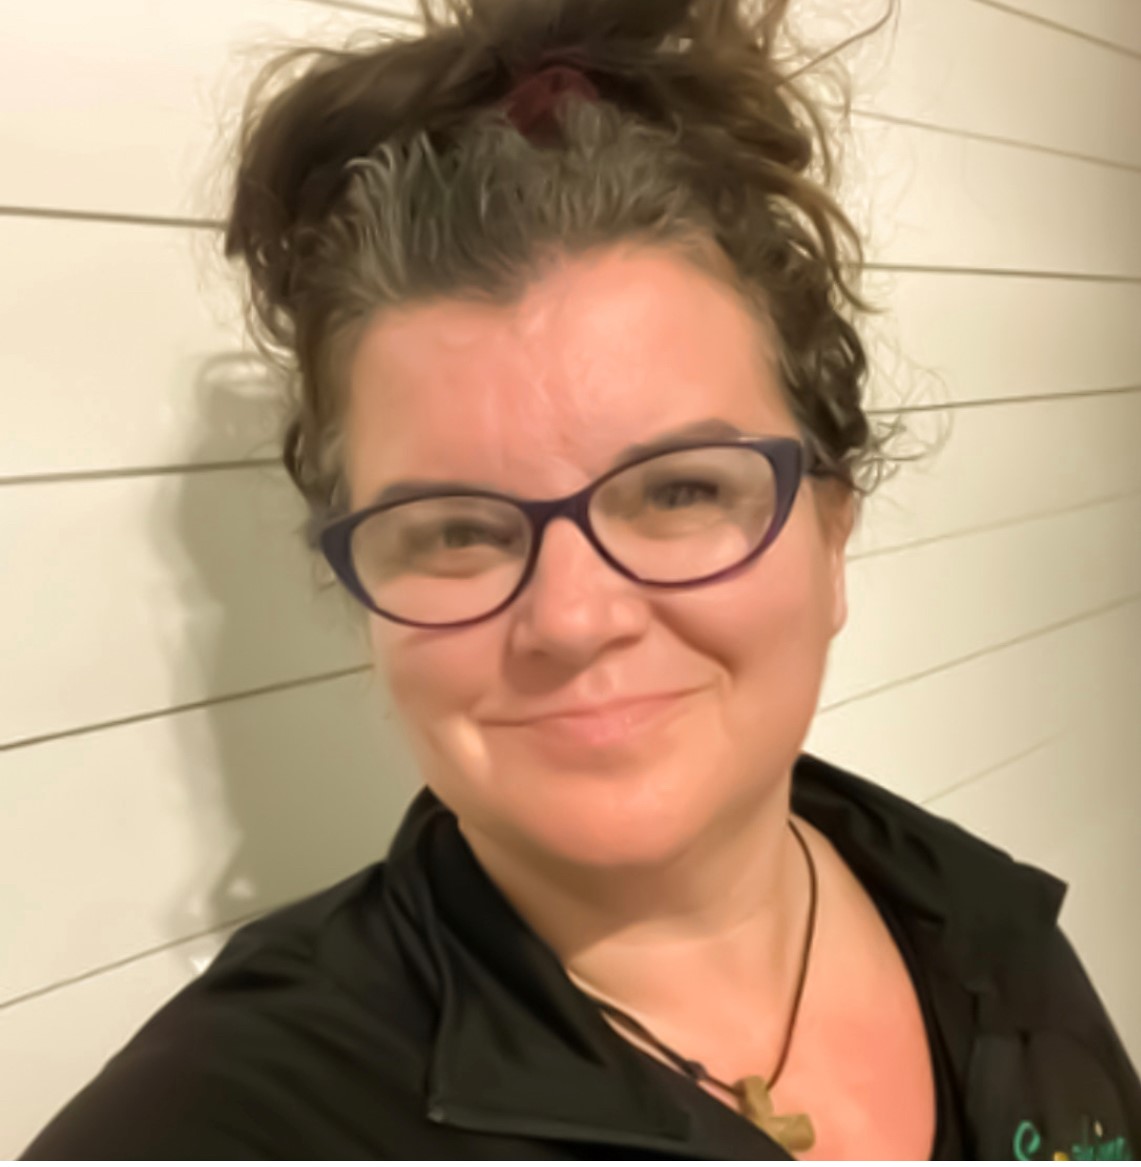 Haley Hennlich is a white woman with glasses and curly hair pulled back into an updo. She is wearing a dark shirt and standing in front of a white shiplap background.